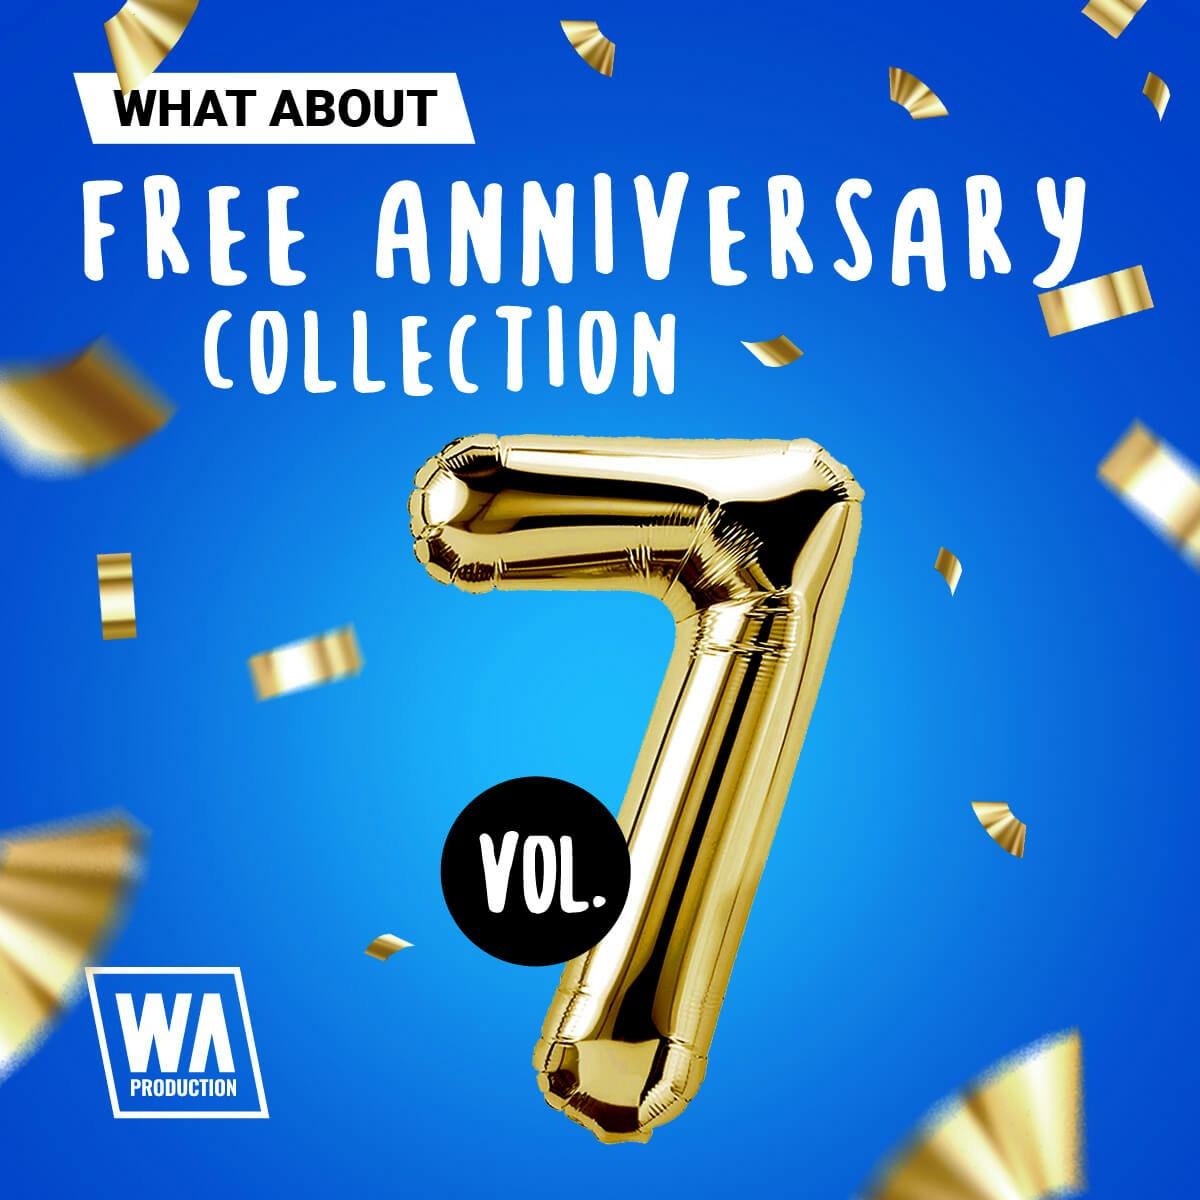 Free Anniversary Collection Vol. 7 | W. A. Production